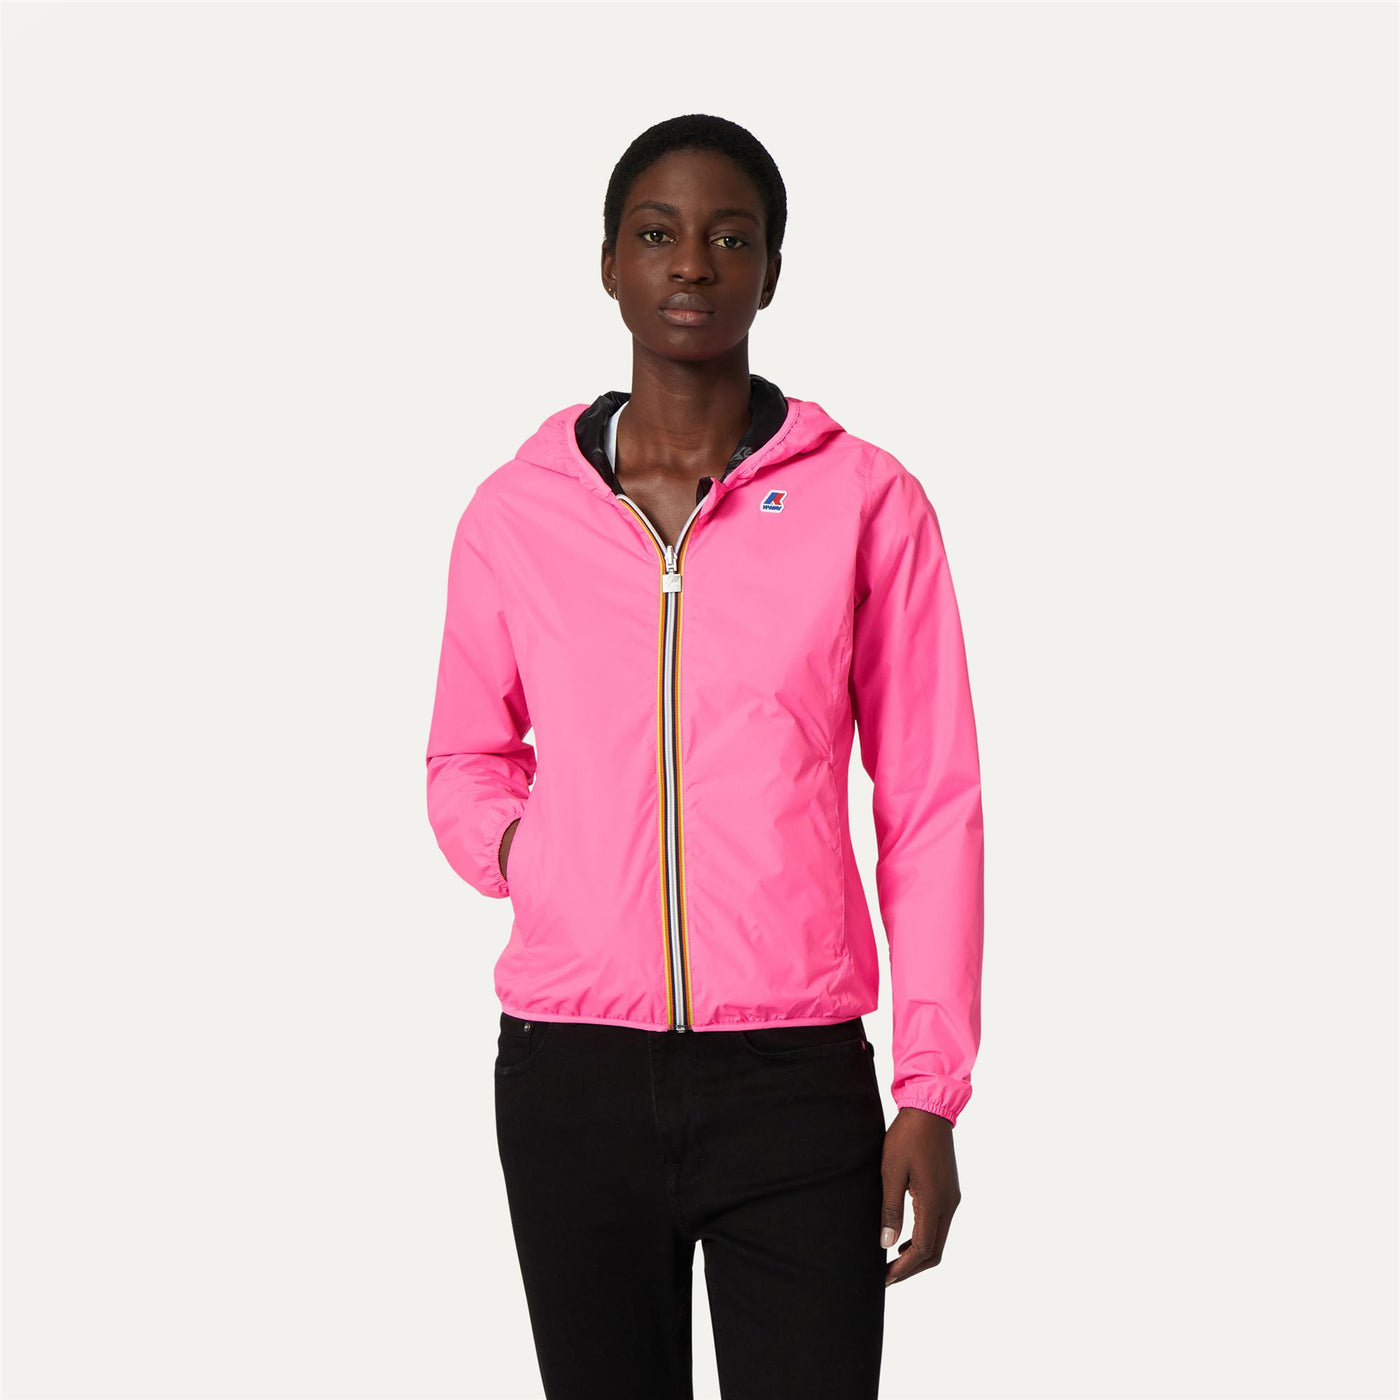 Jackets Woman Lily Plus Double Fluo Short PINK FLUO-BLACK Dressed Back (jpg Rgb)		